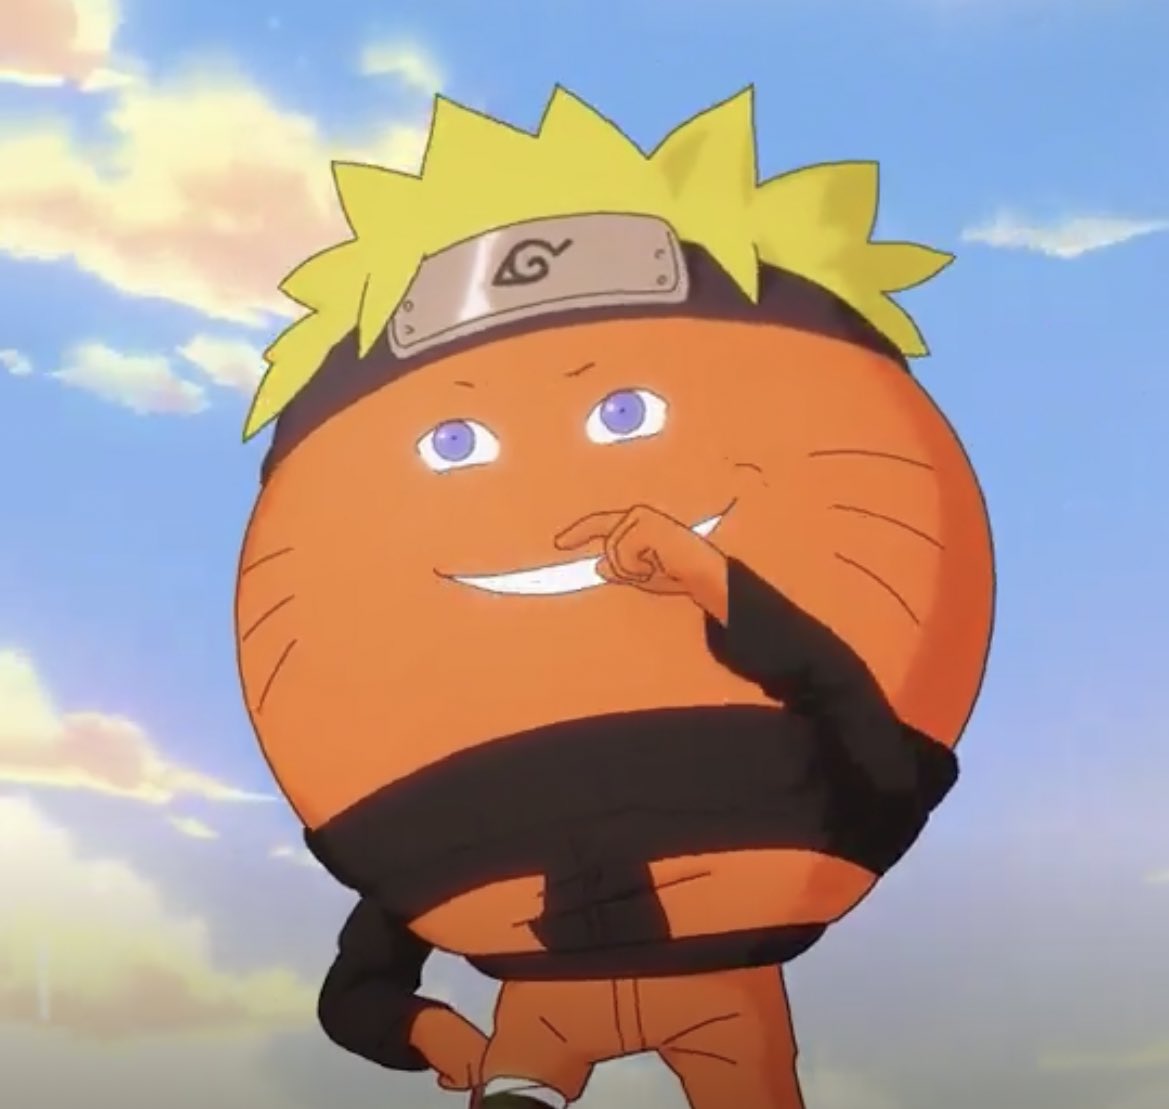 The king looking good too! #Naruto x Oasis